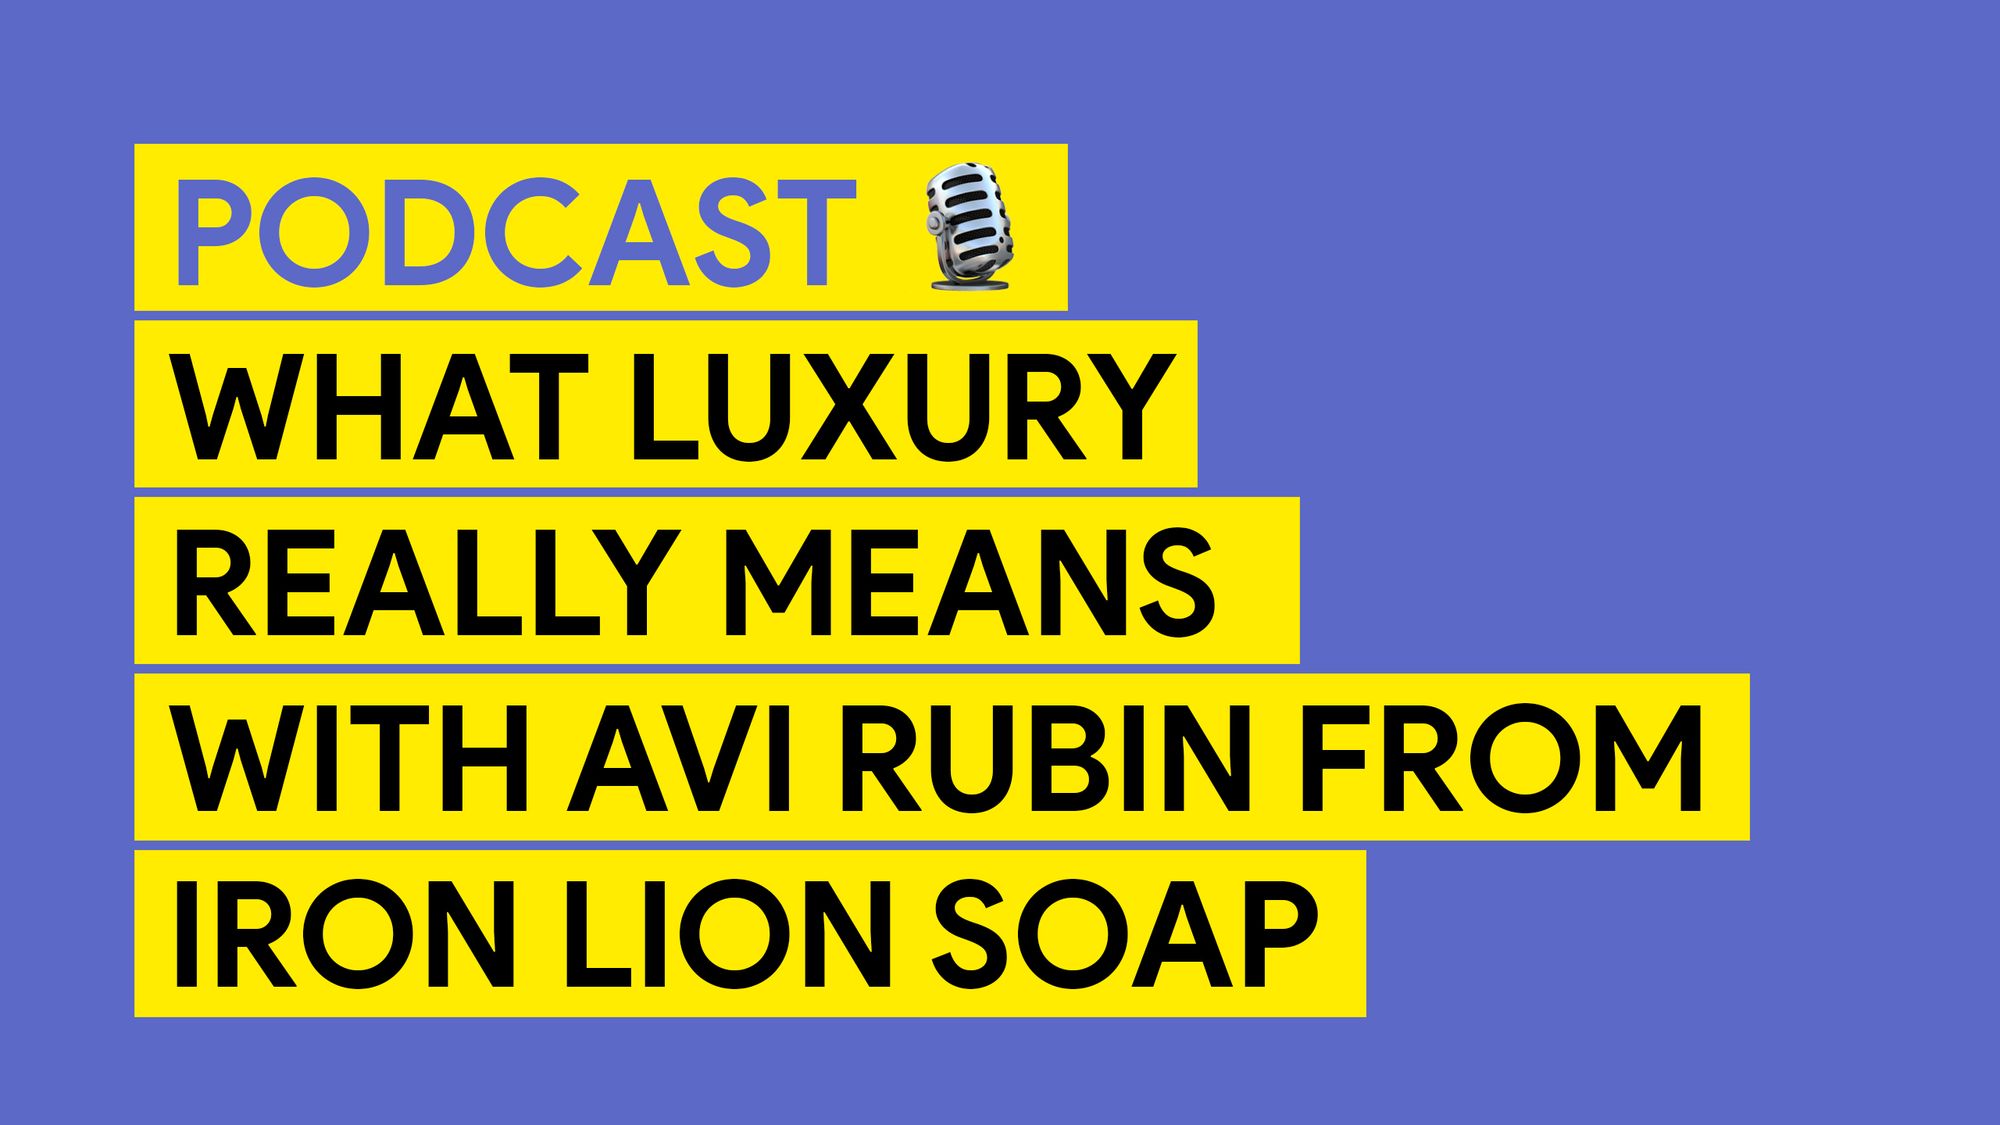 What luxury really means.